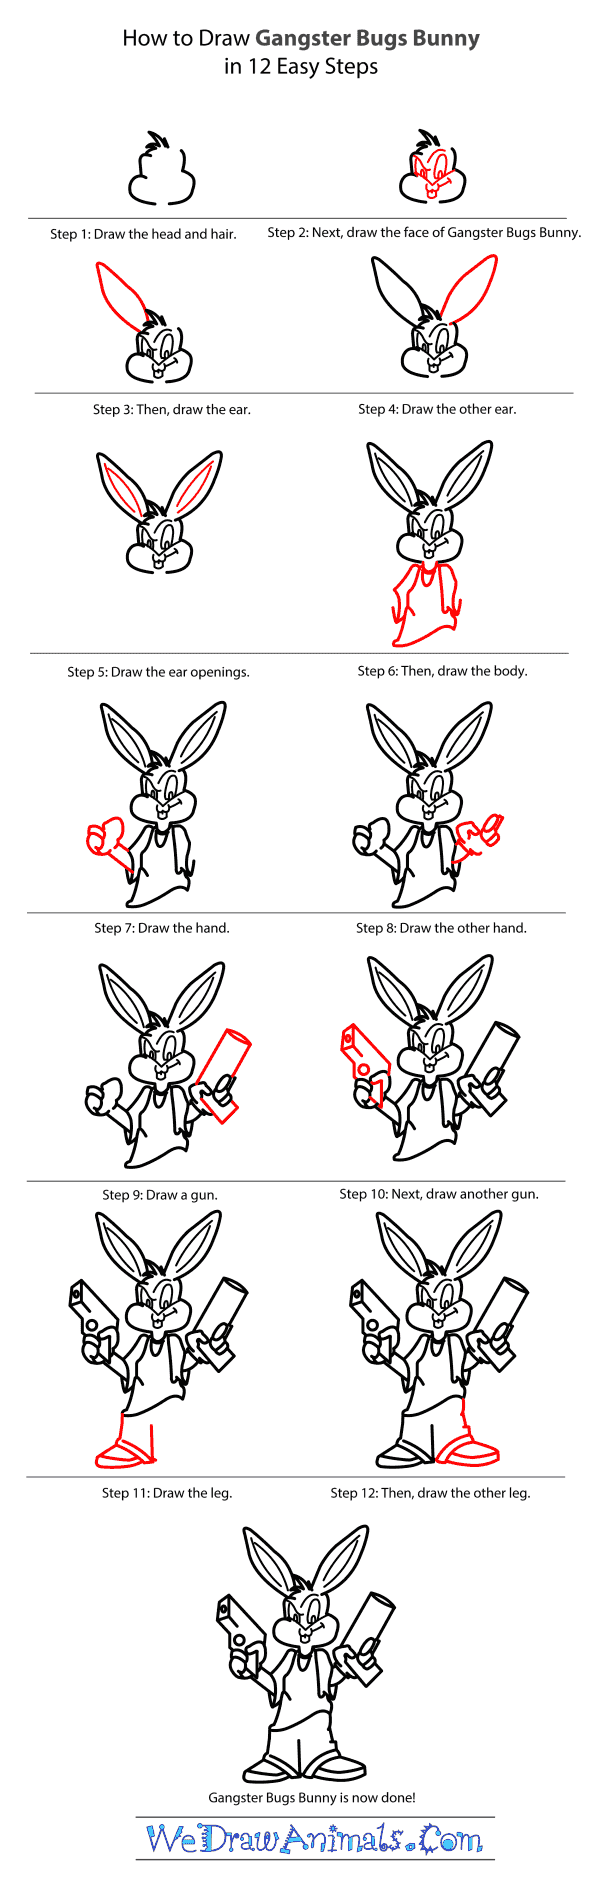 how to draw bugs bunny gangster step by step